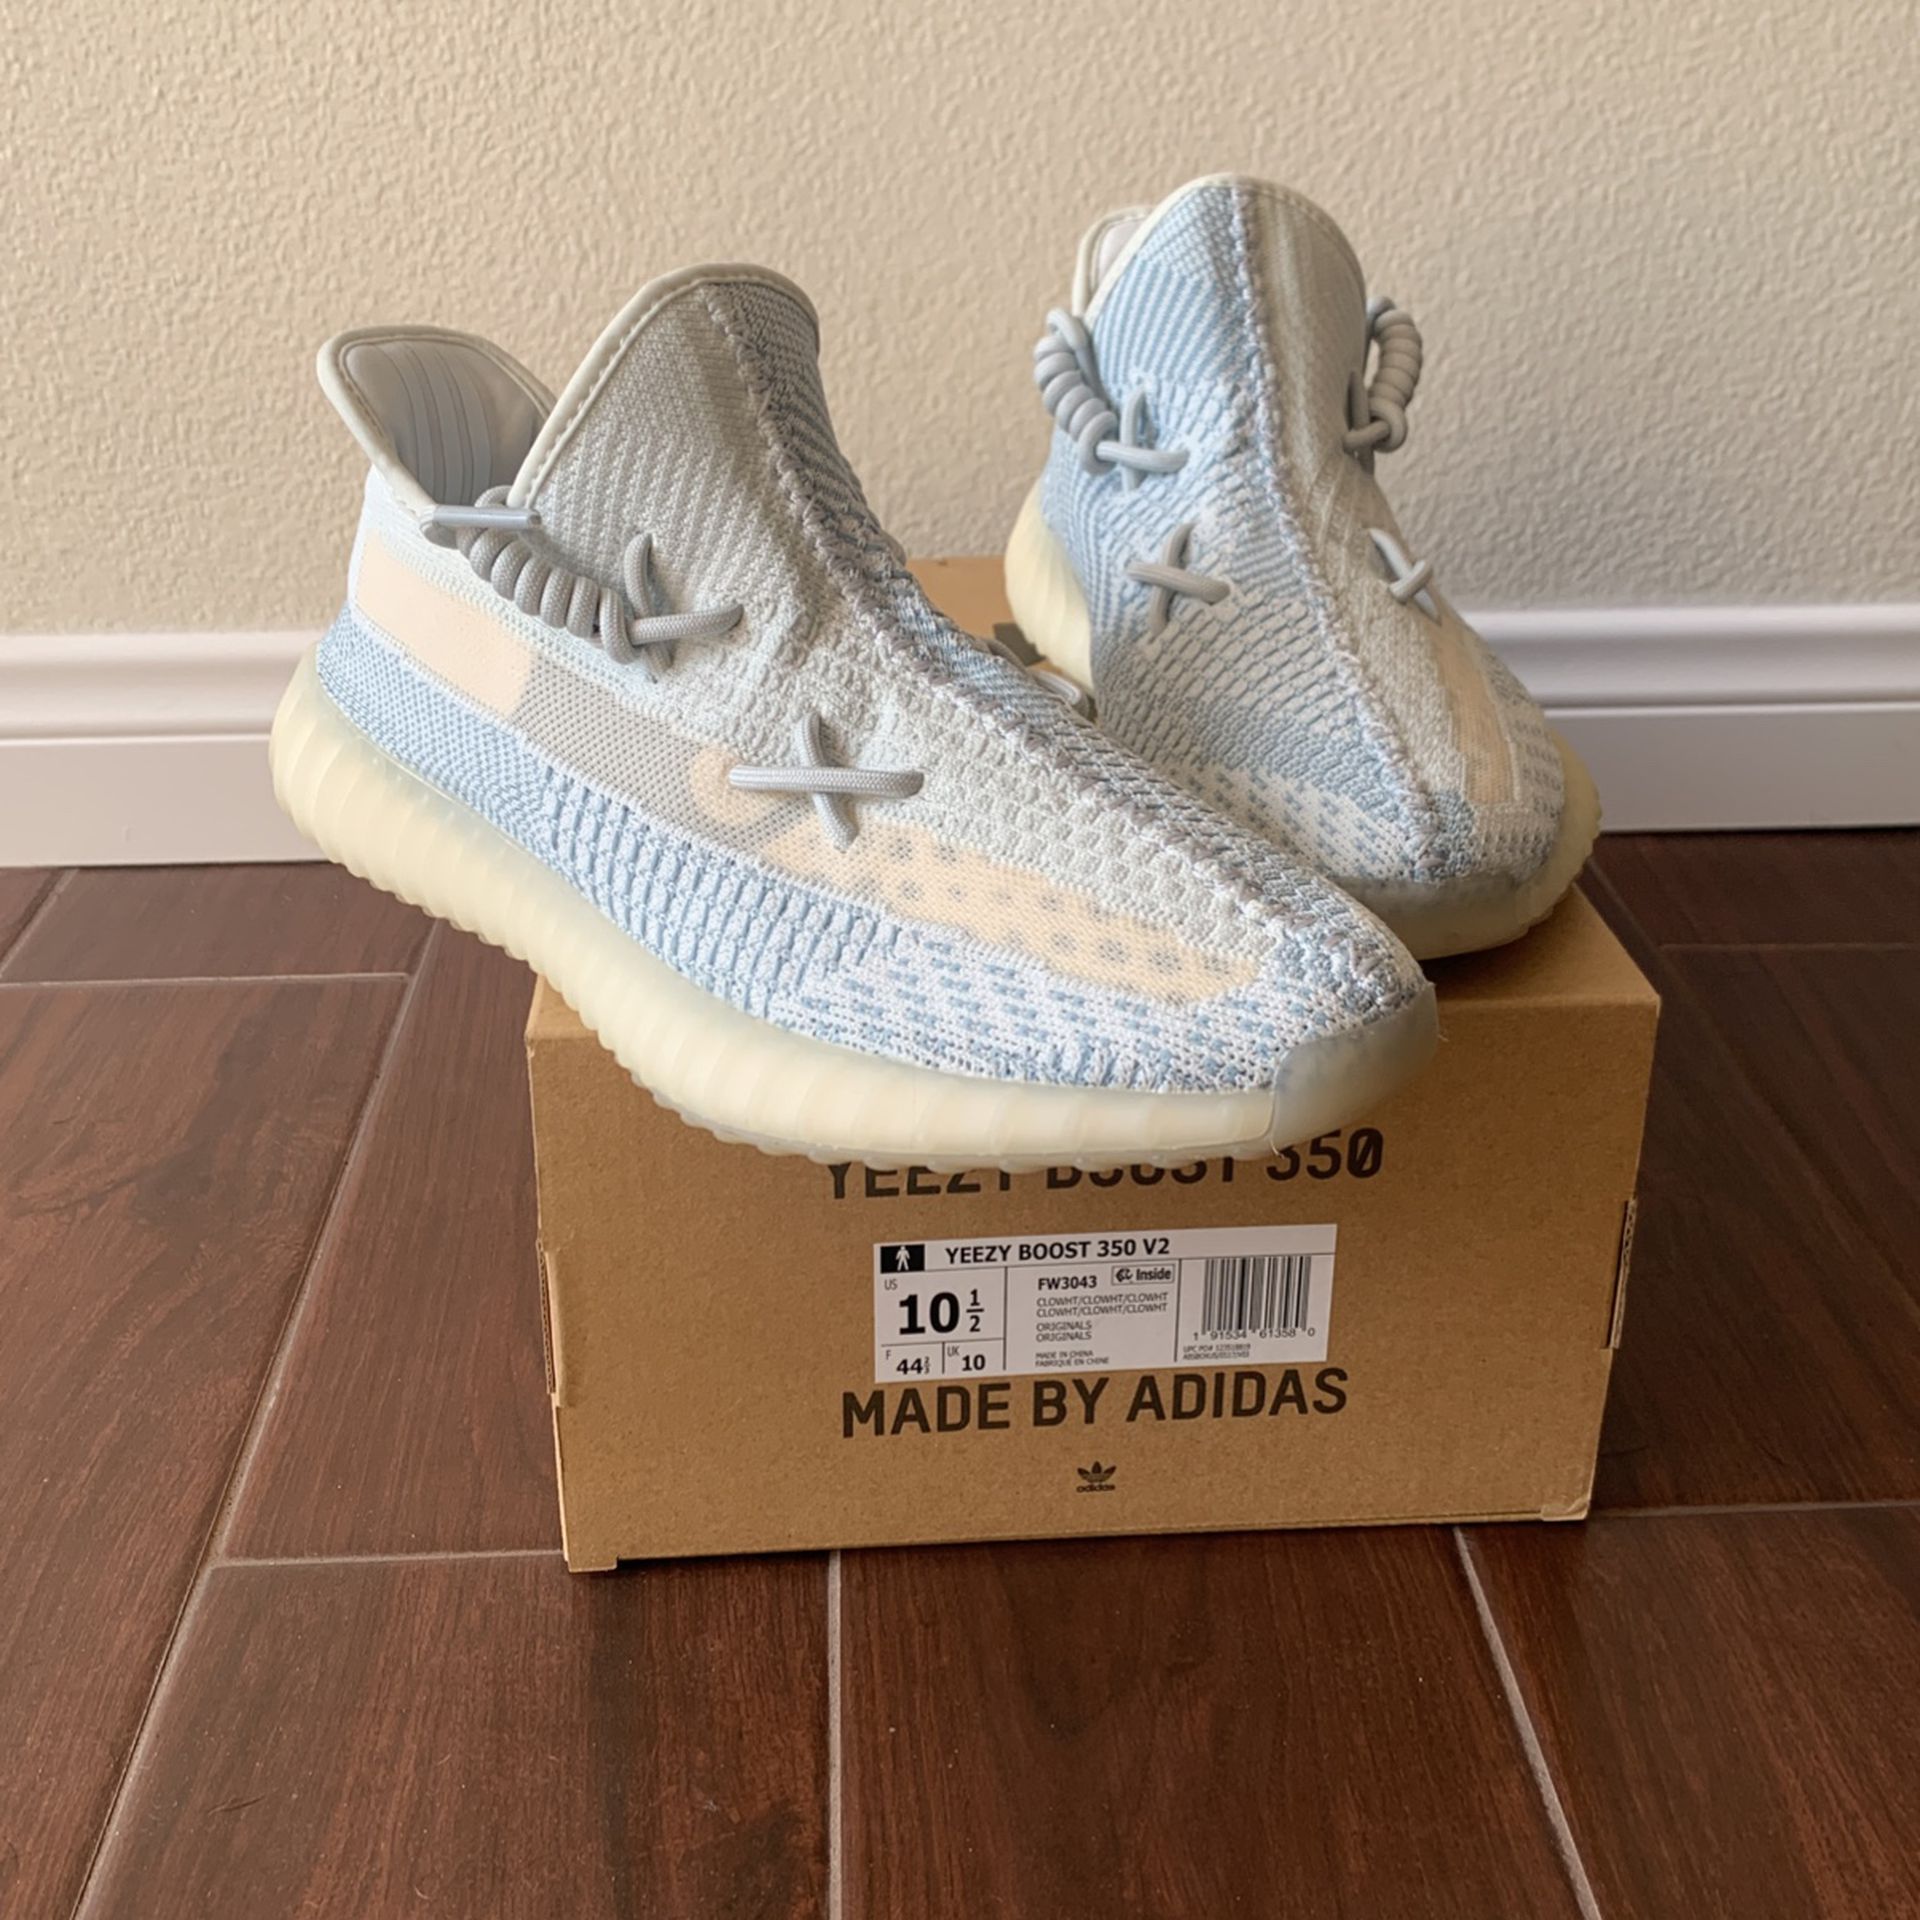 Yeezy Cloud 350 V2 for Sale in Carlsbad, CA OfferUp